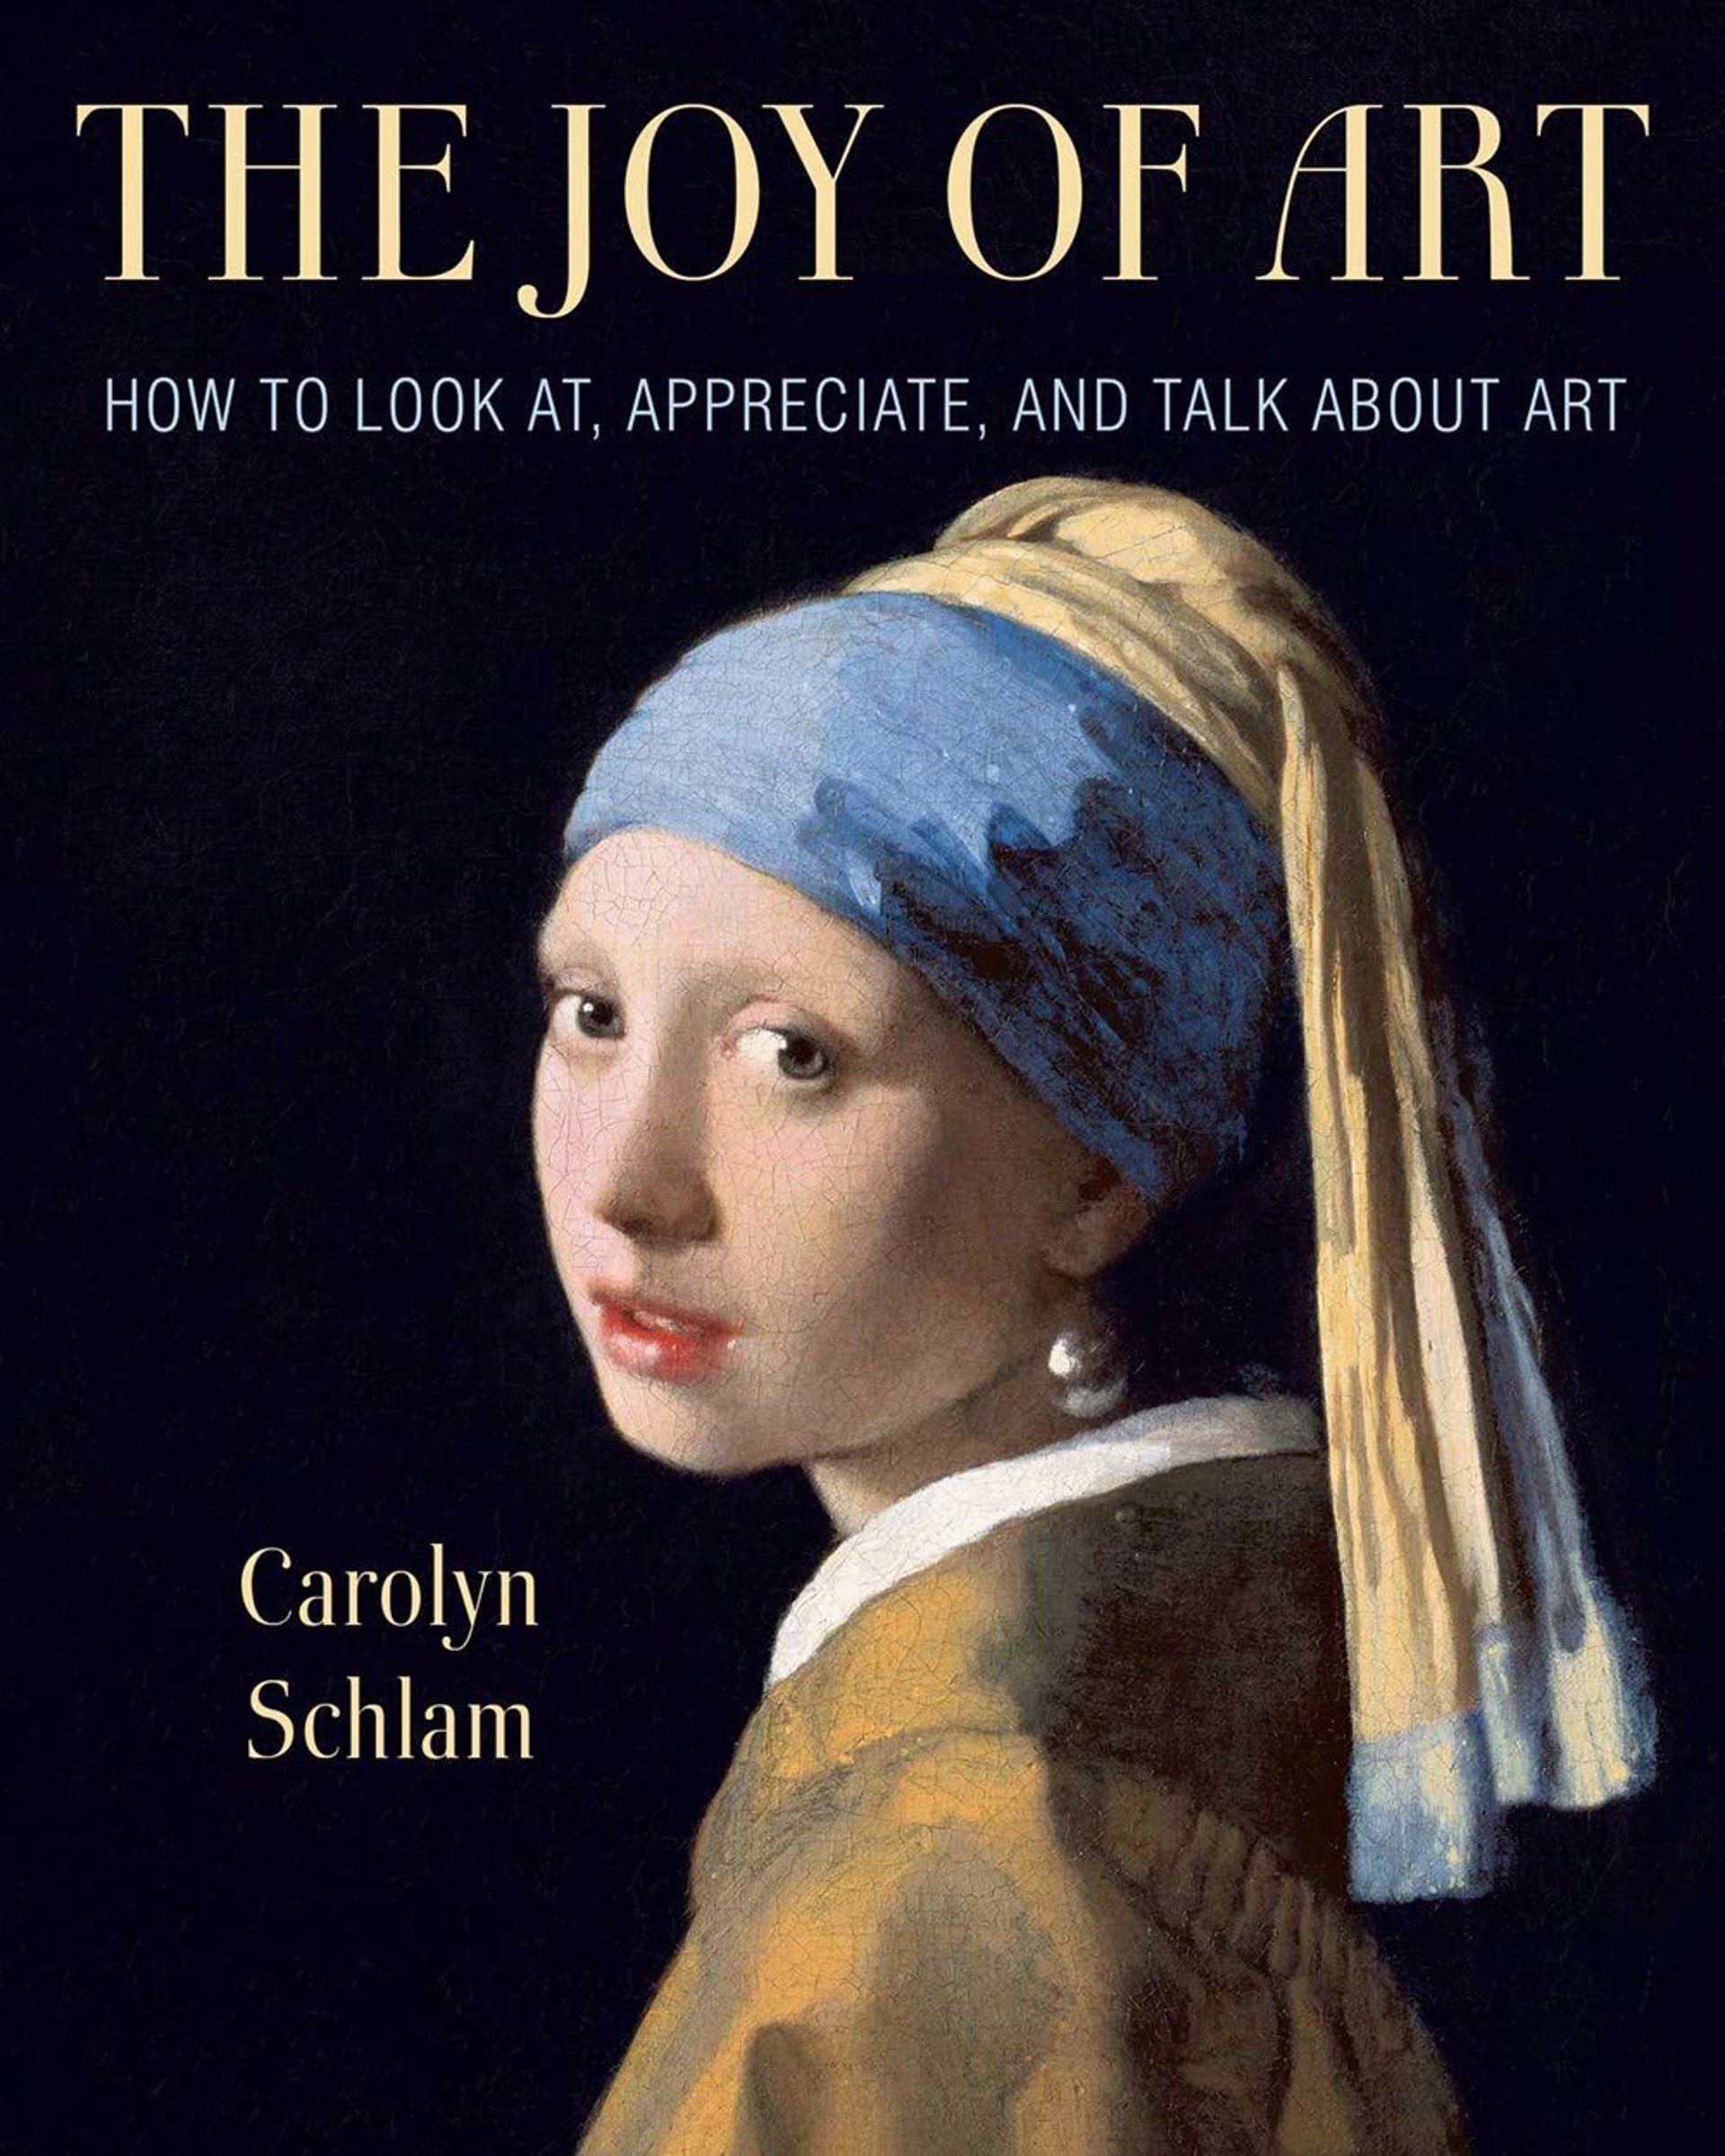 The Joy of Art Softcover by Carolyn Schlam Author